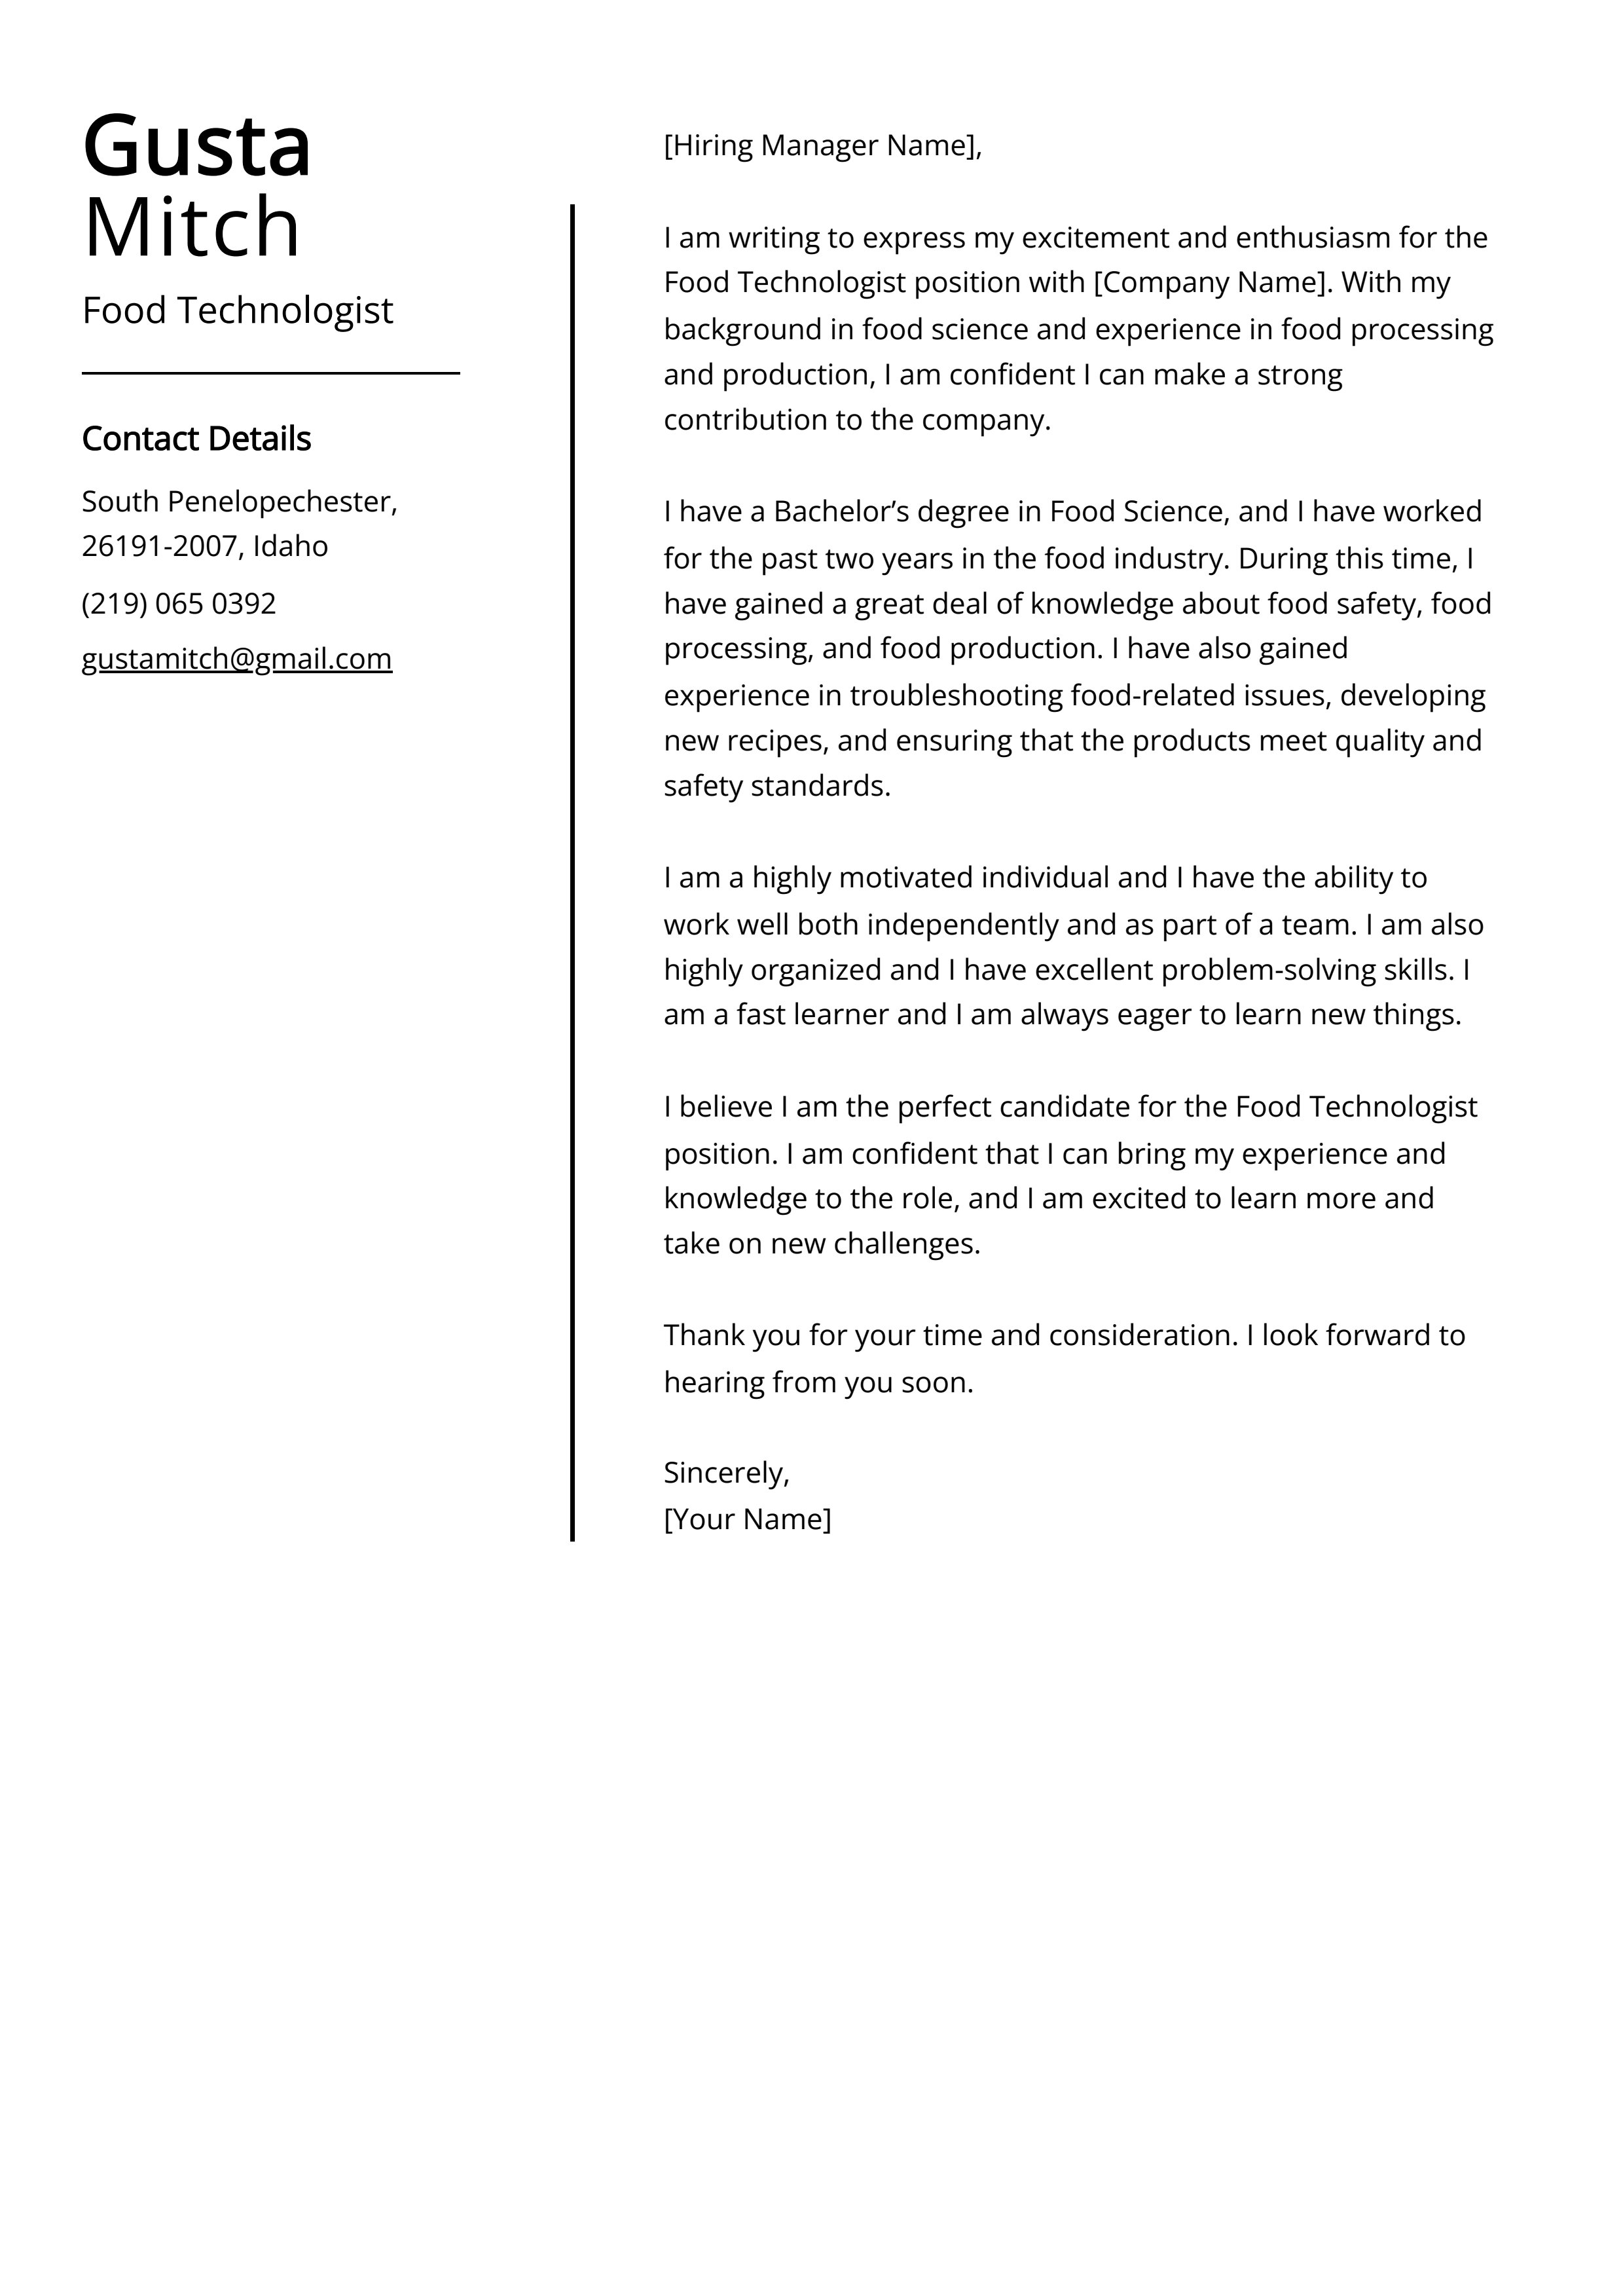 Food Technologist Cover Letter Example